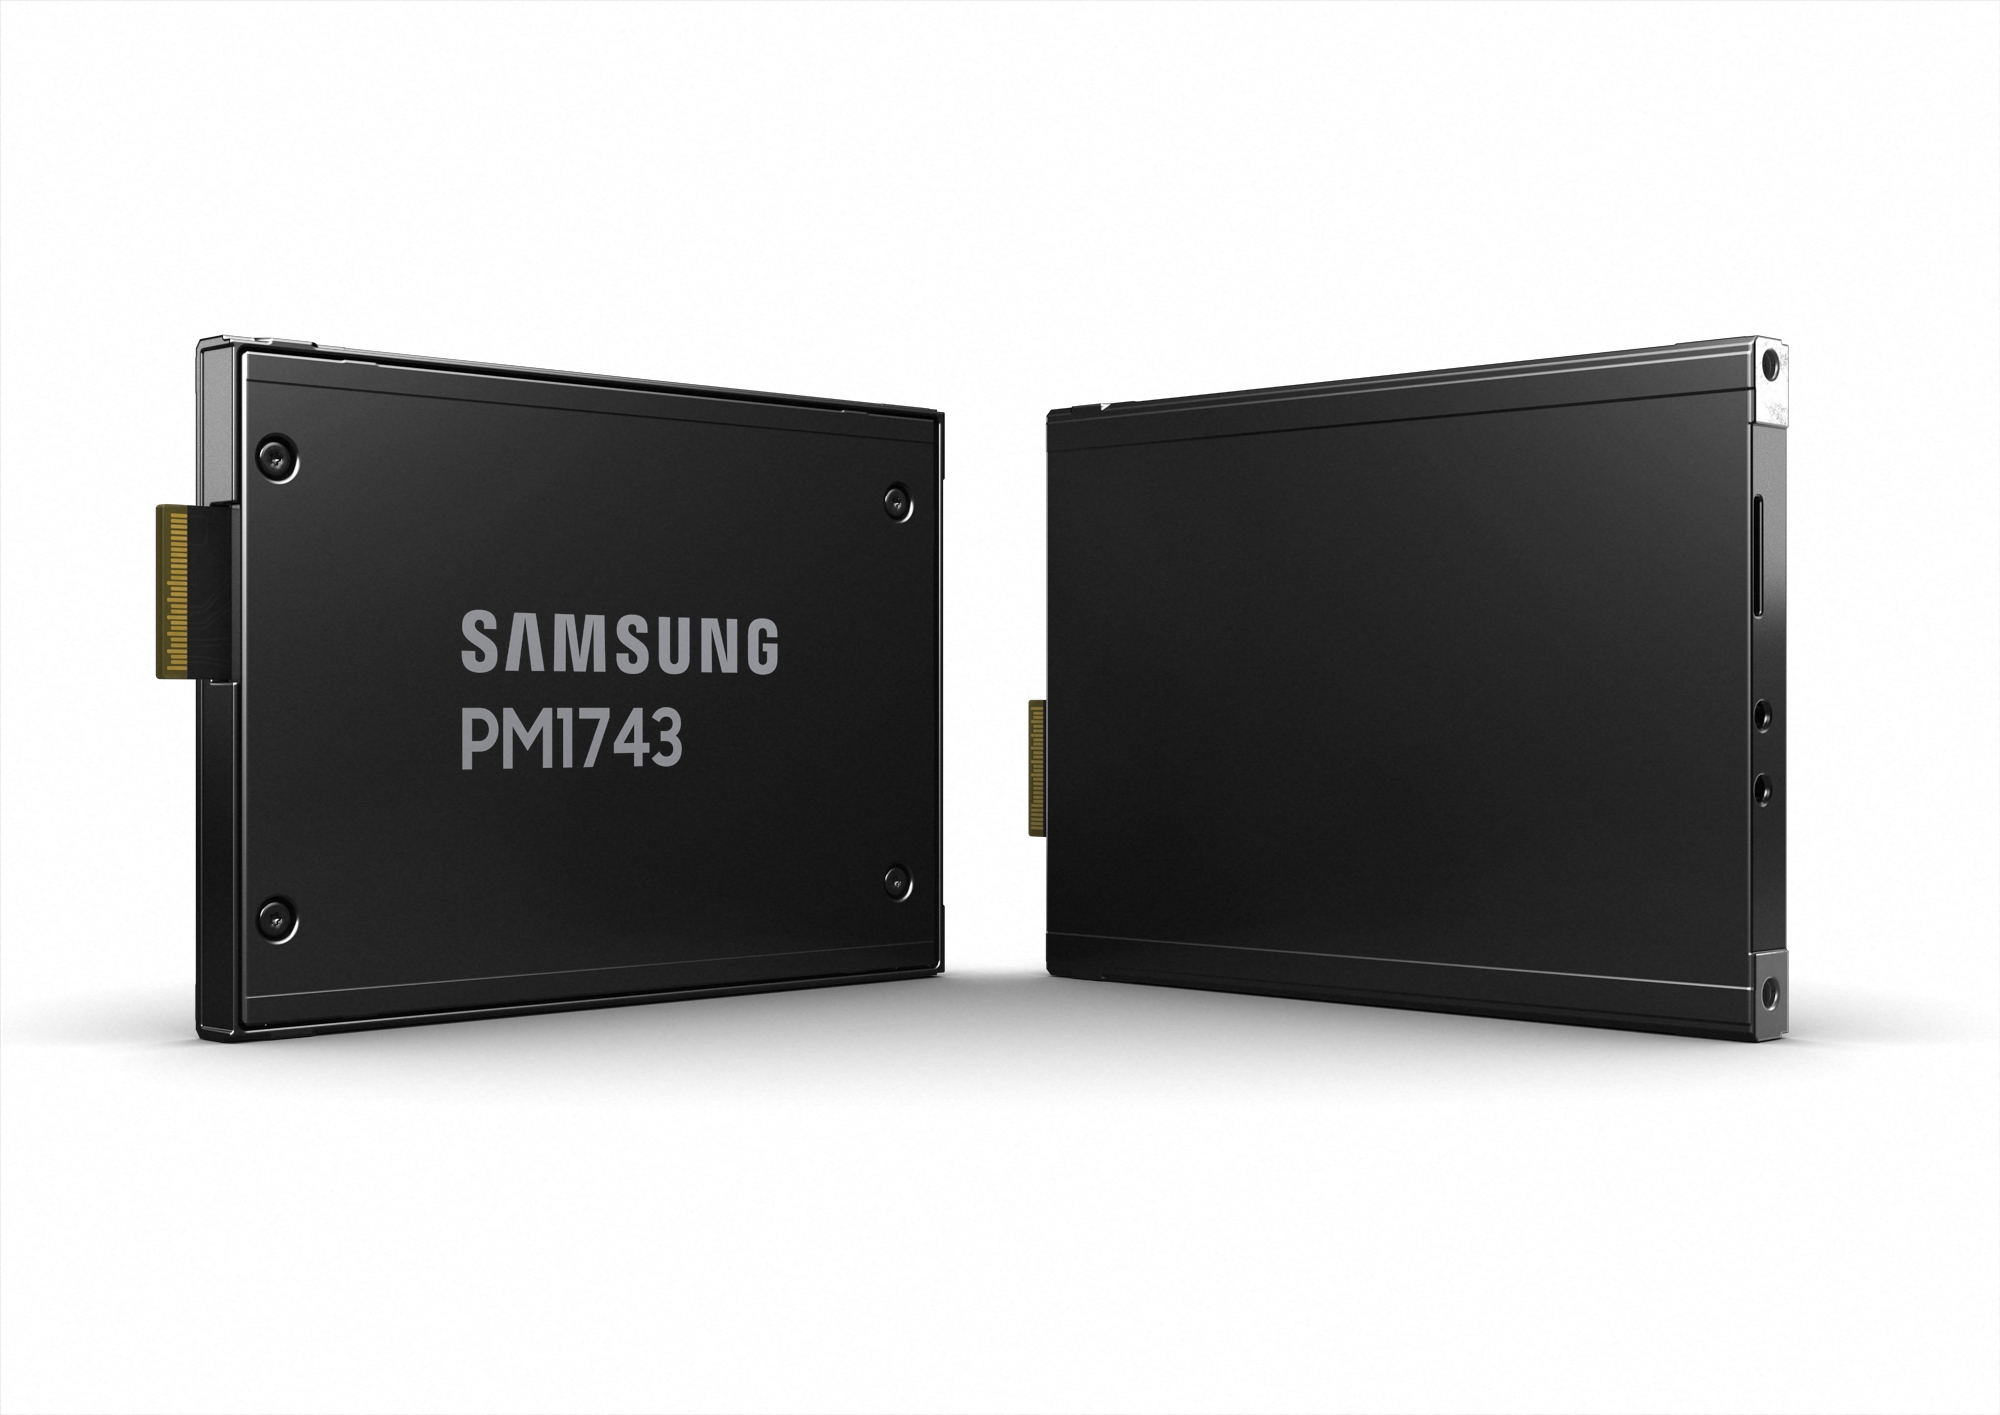 Samsung teases a PCI 5.0 SSD that can hit 13,000 MB/s read speeds